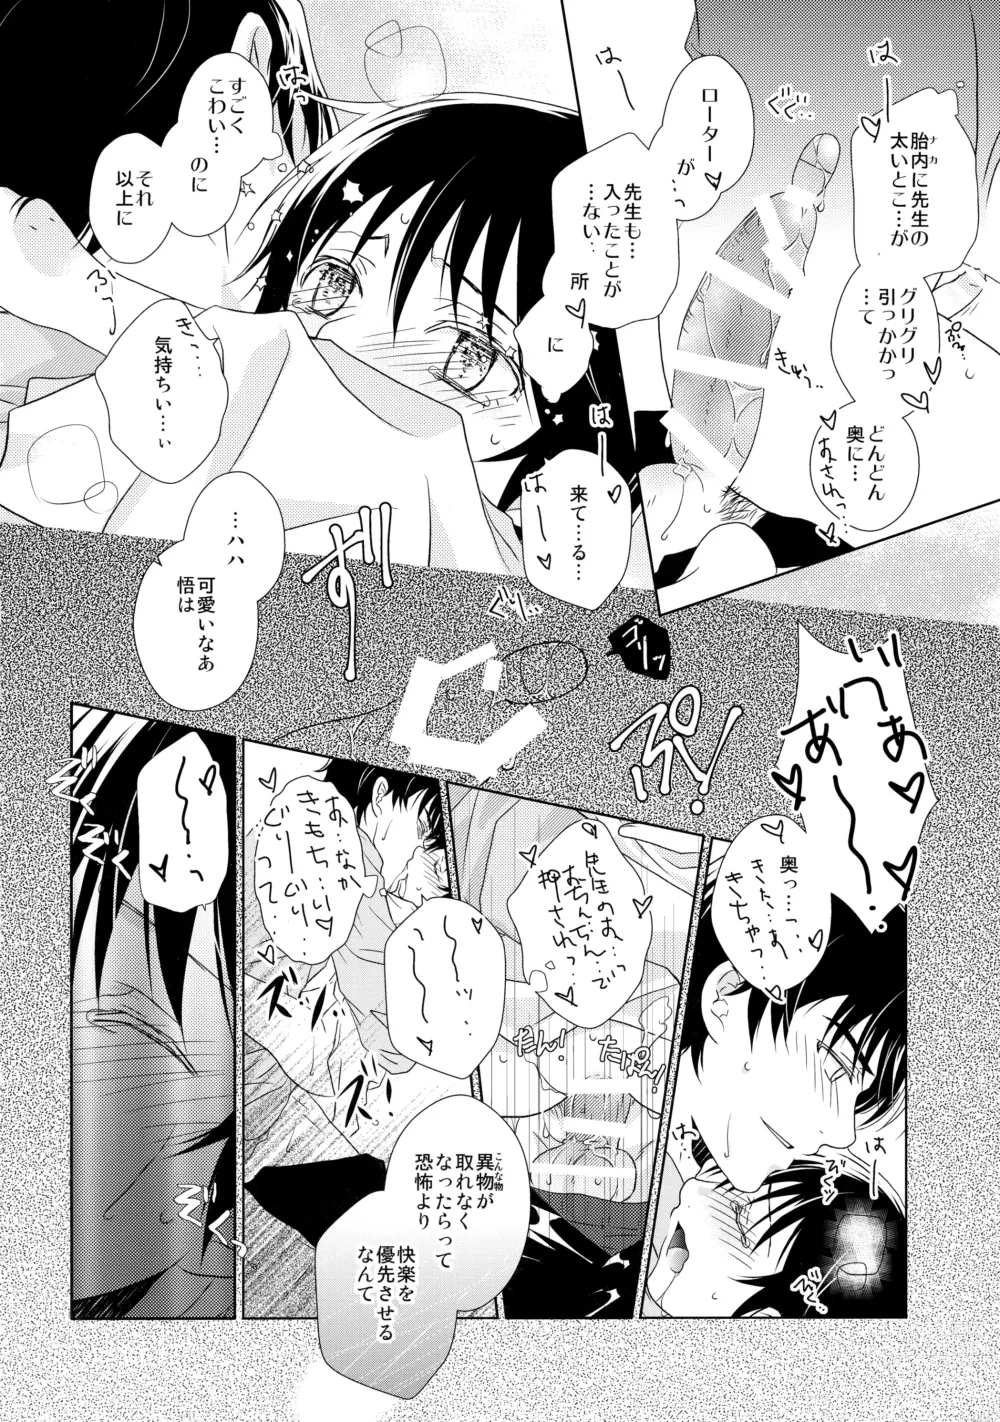 Page 11 of doujinshi Butterfield 8